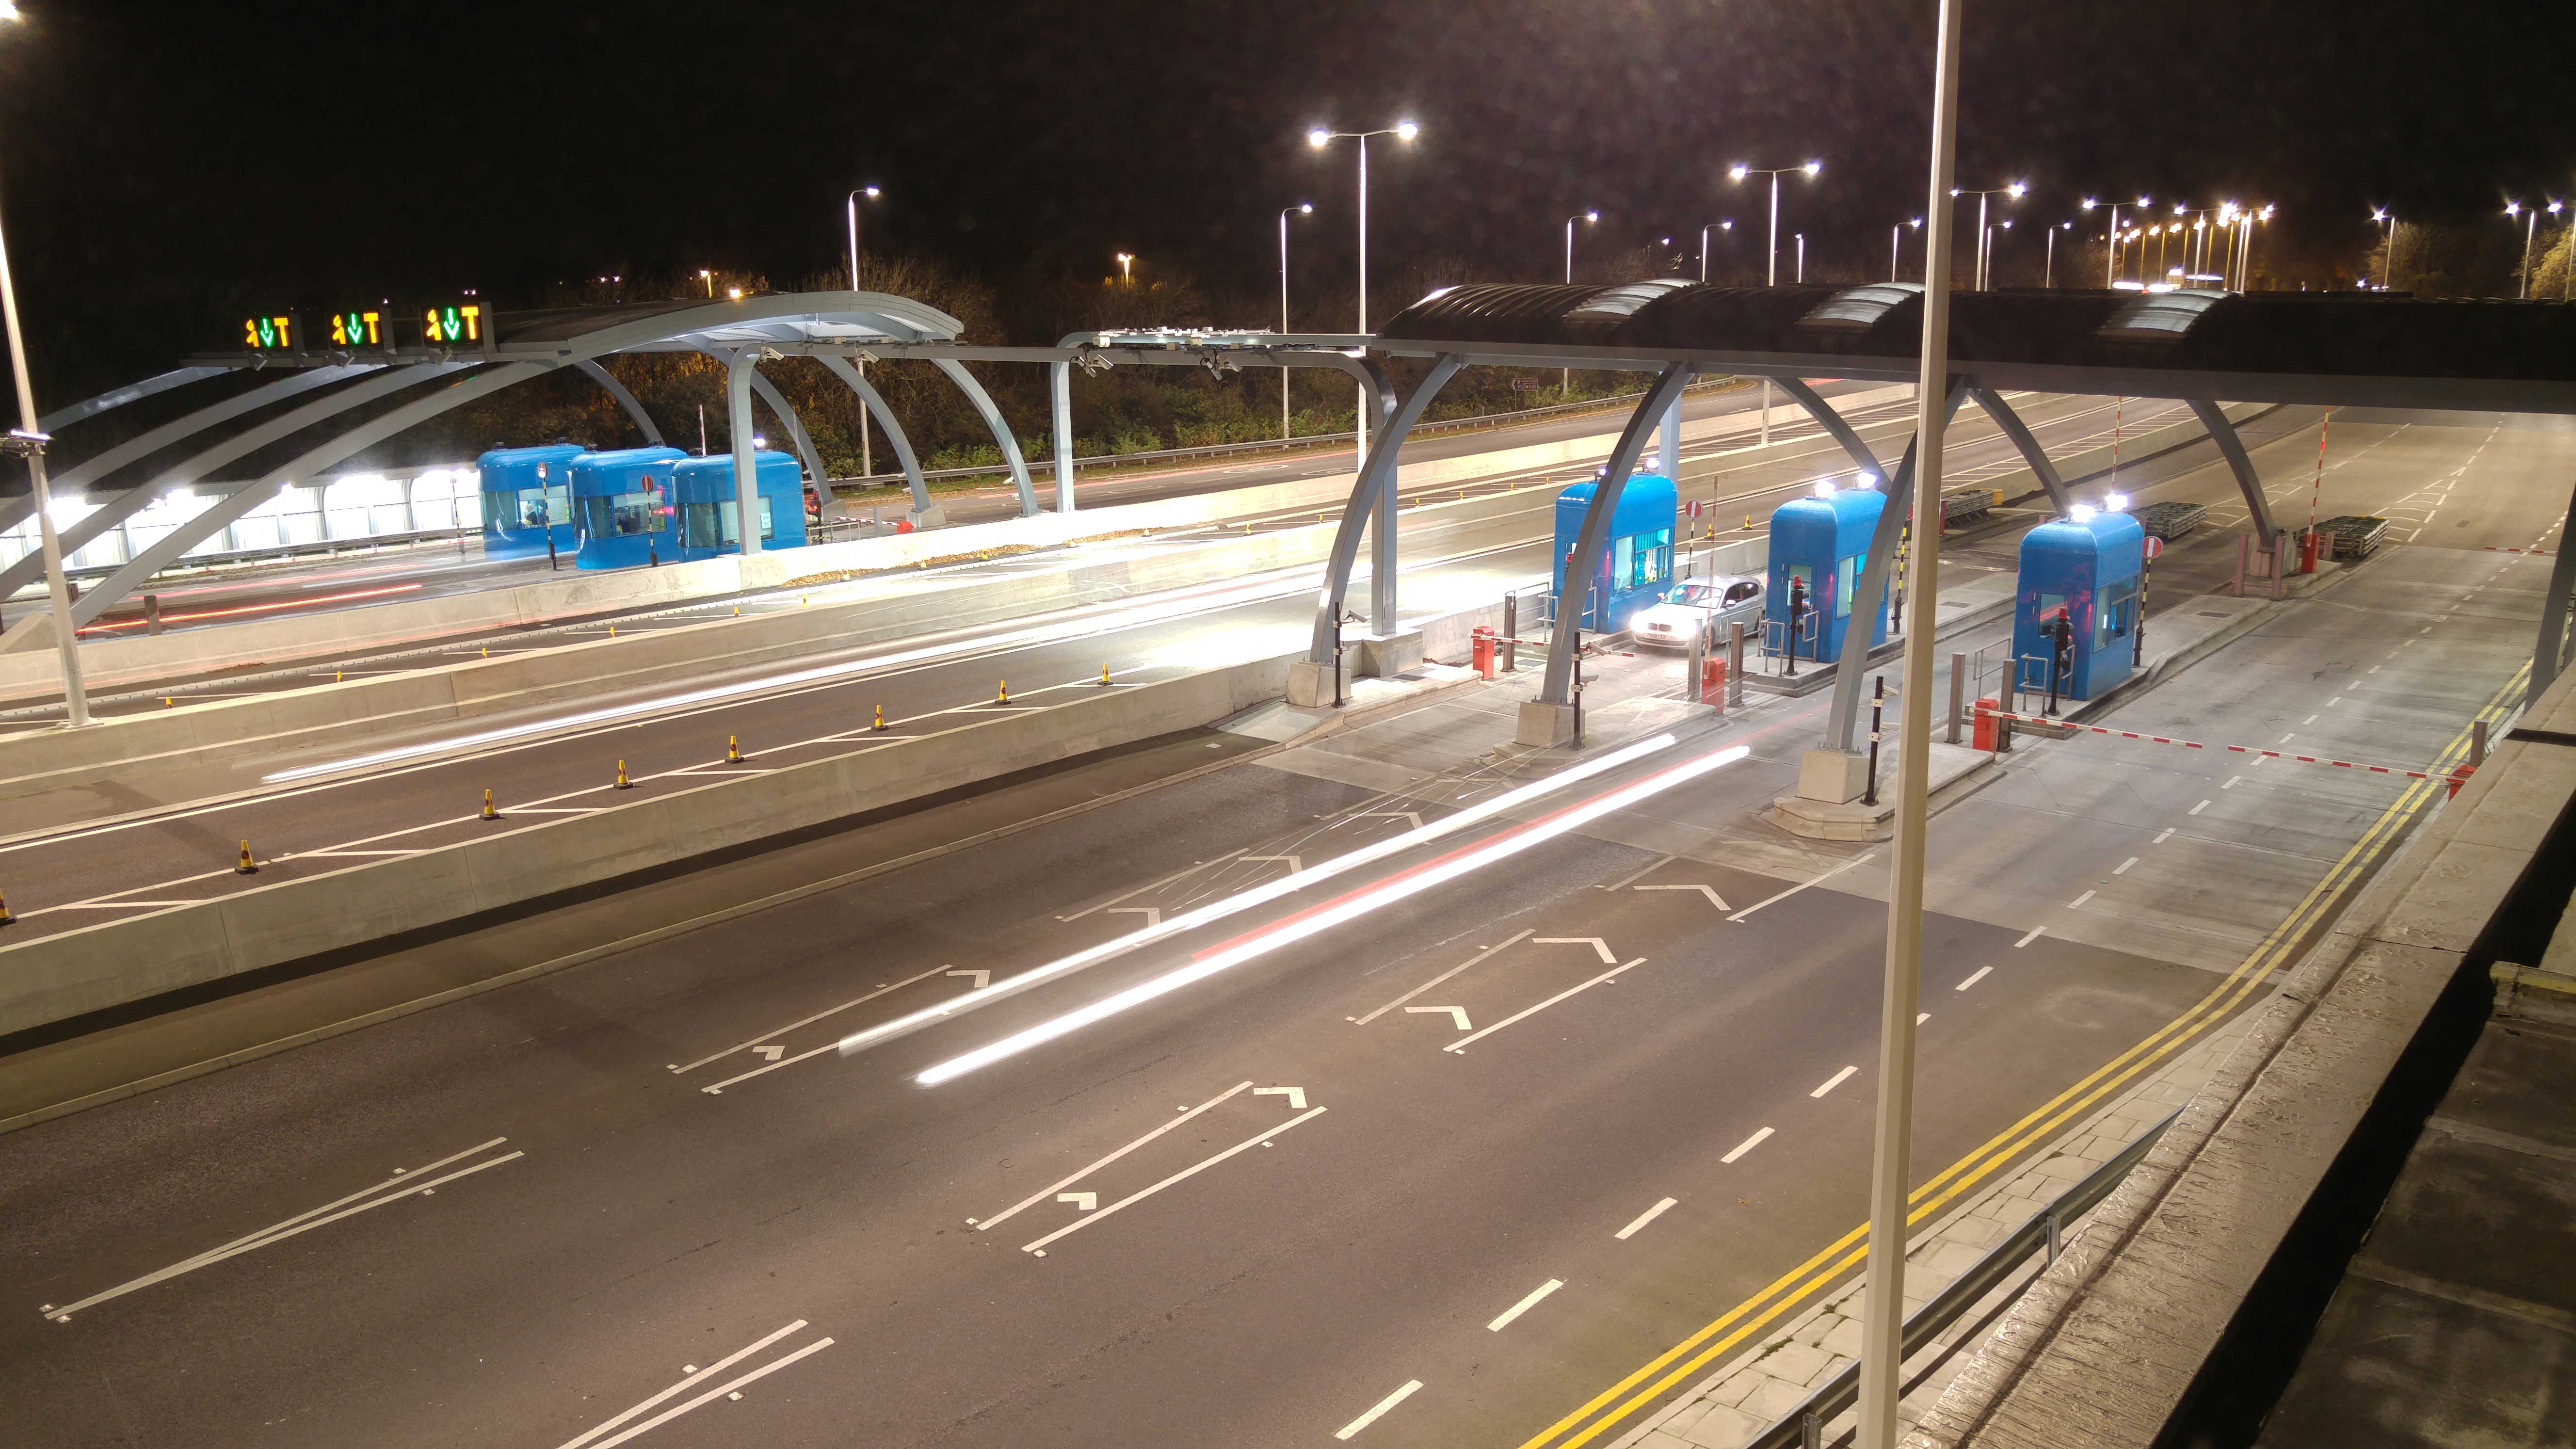 Replacement of the Humber Bridge toll collection system including conventional electronic toll collection and the multi-lane free flow lanes